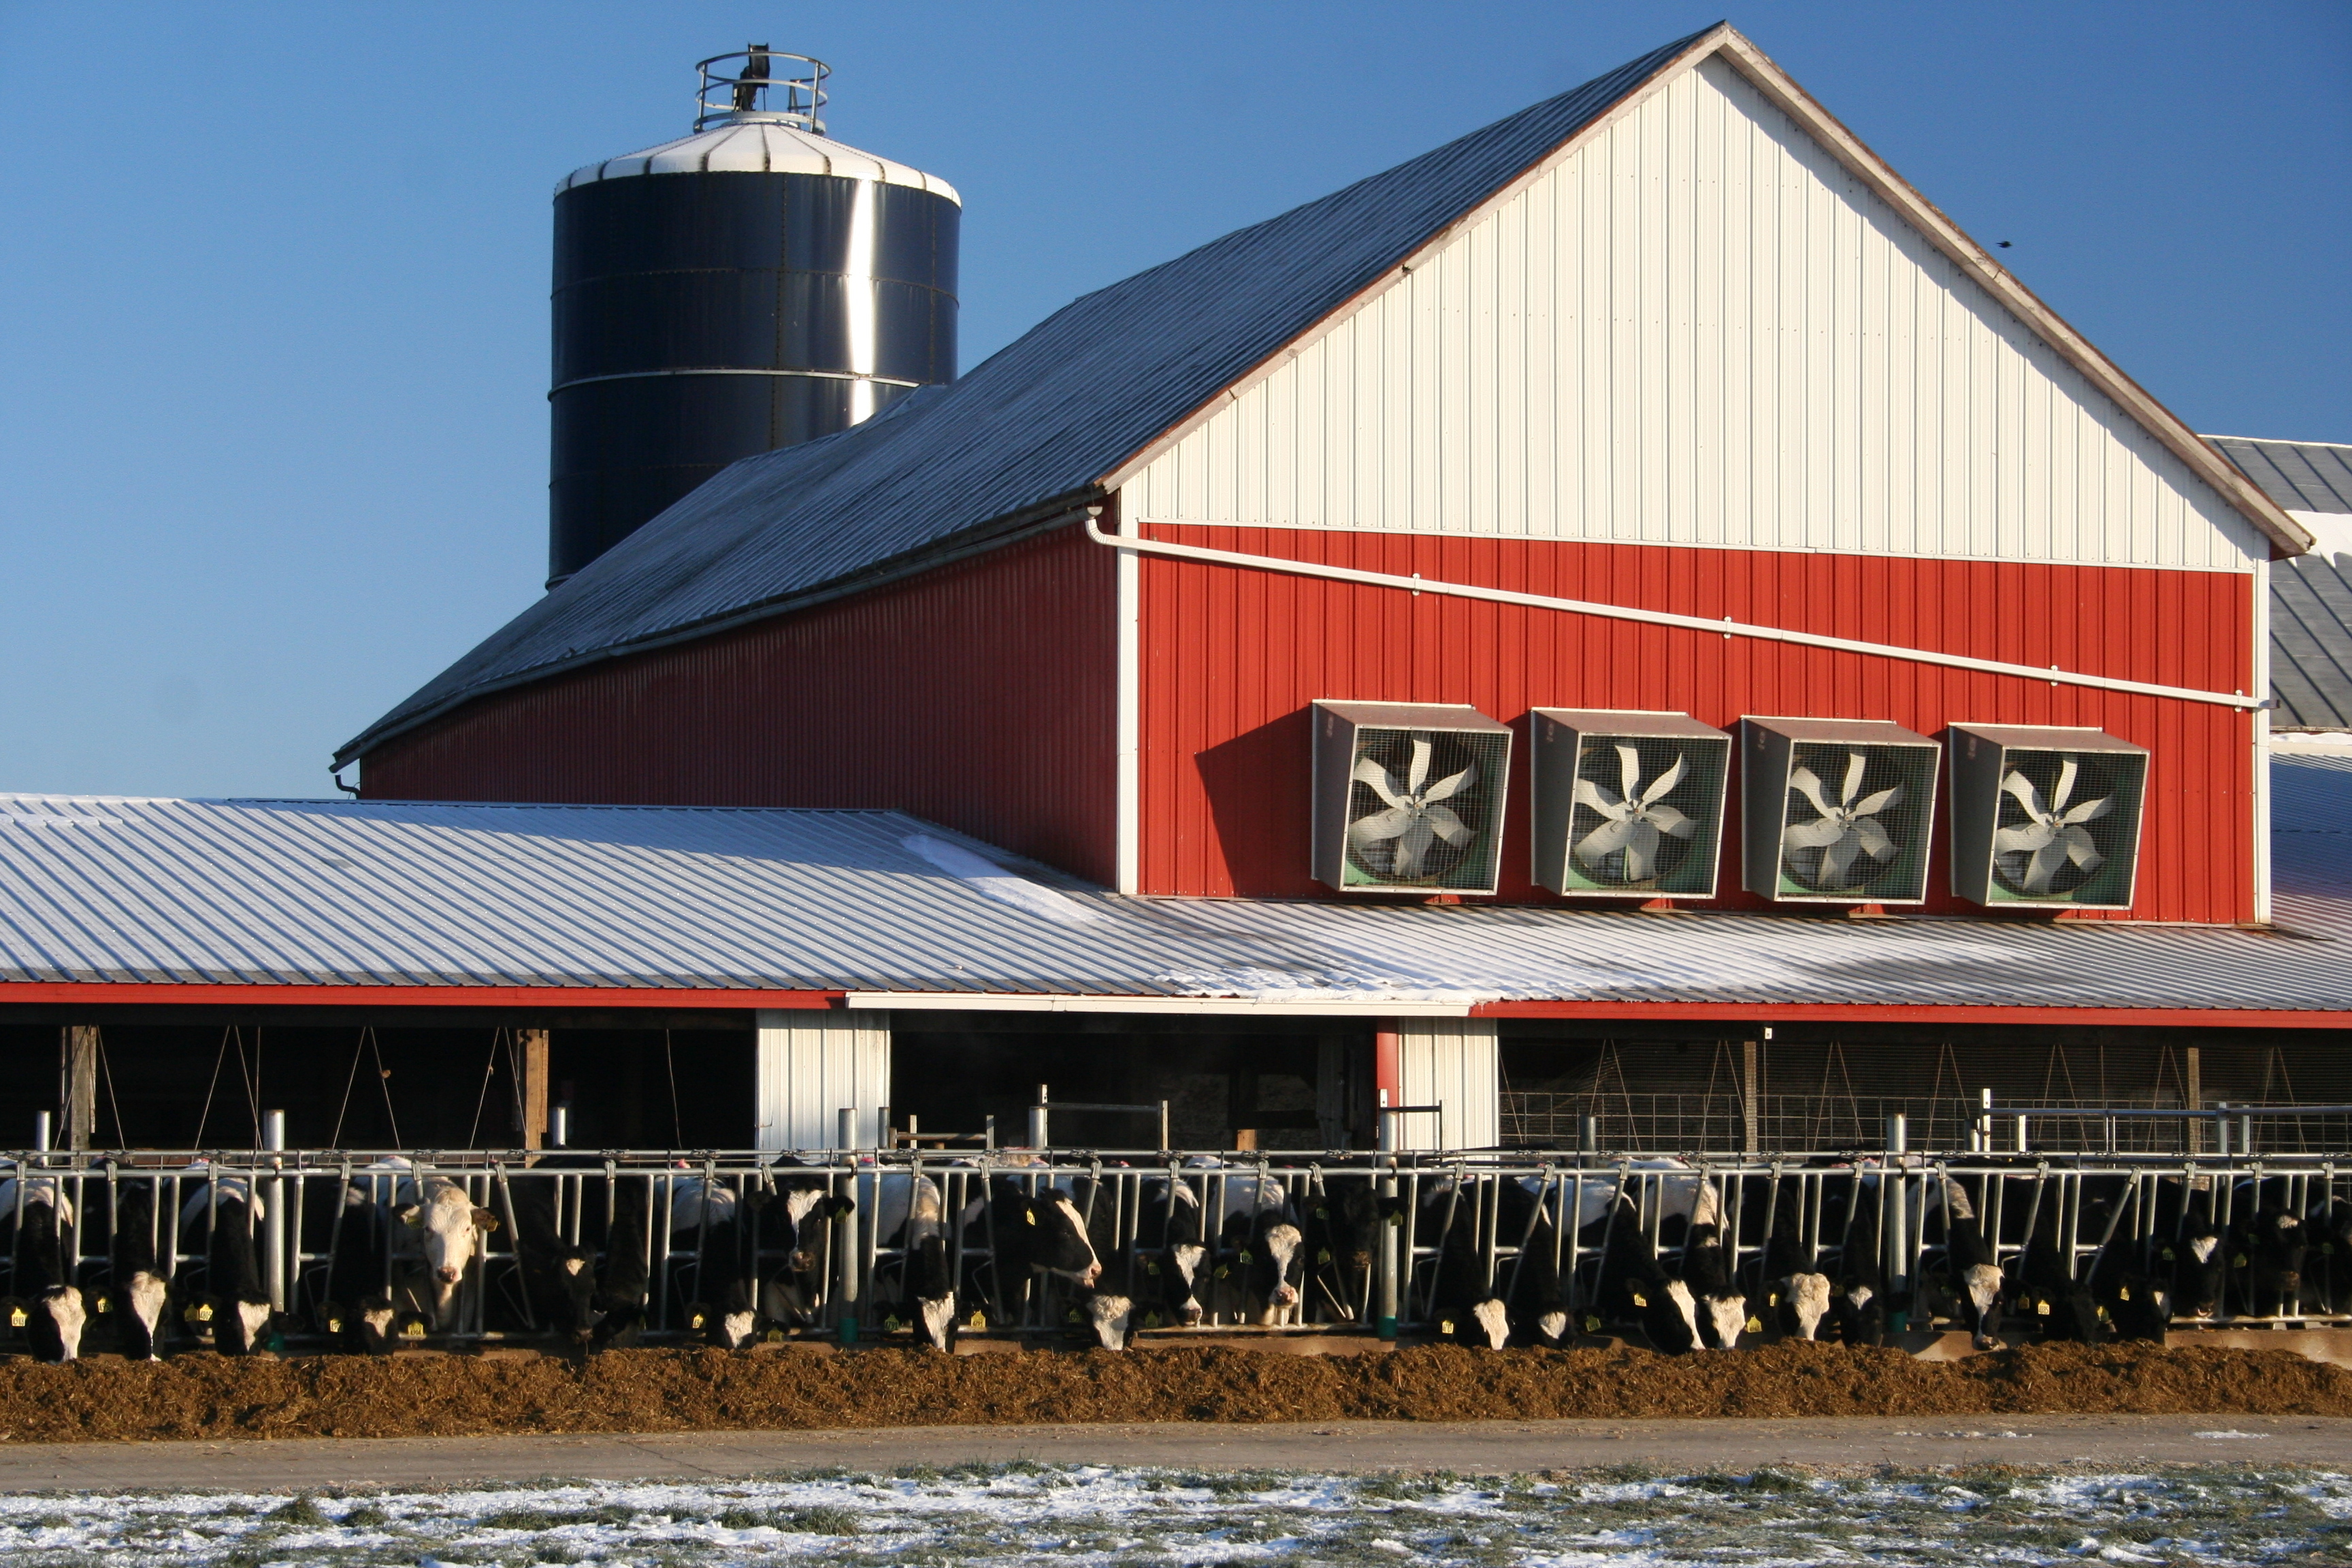 "Bundle Up" Your Cows For The Winter